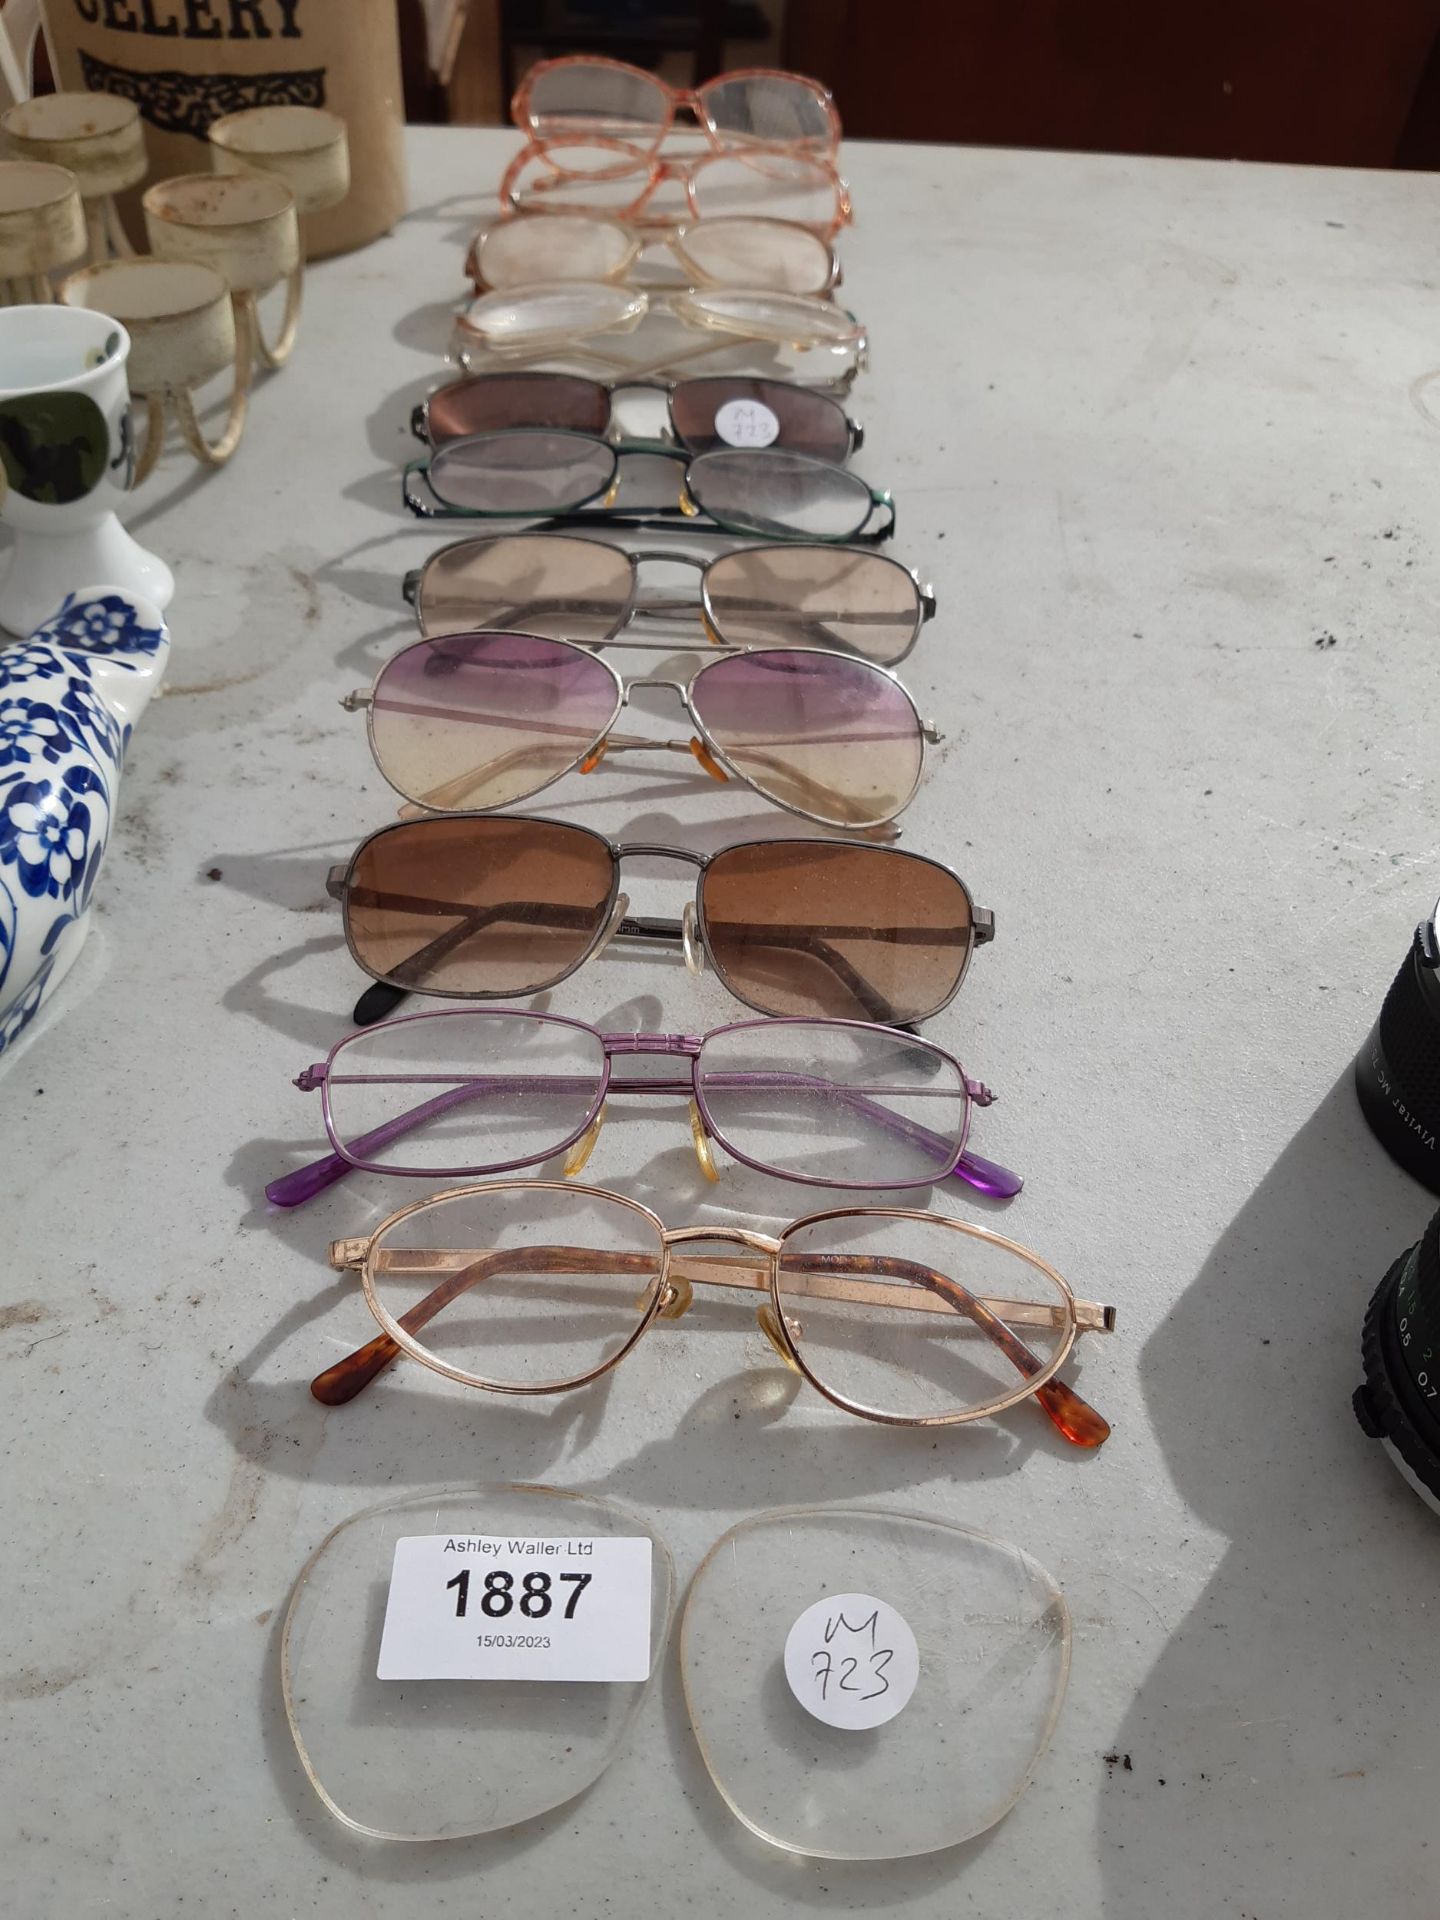 AN ASSORTMENT OF GLASSES AND SUN GLASSES ETC